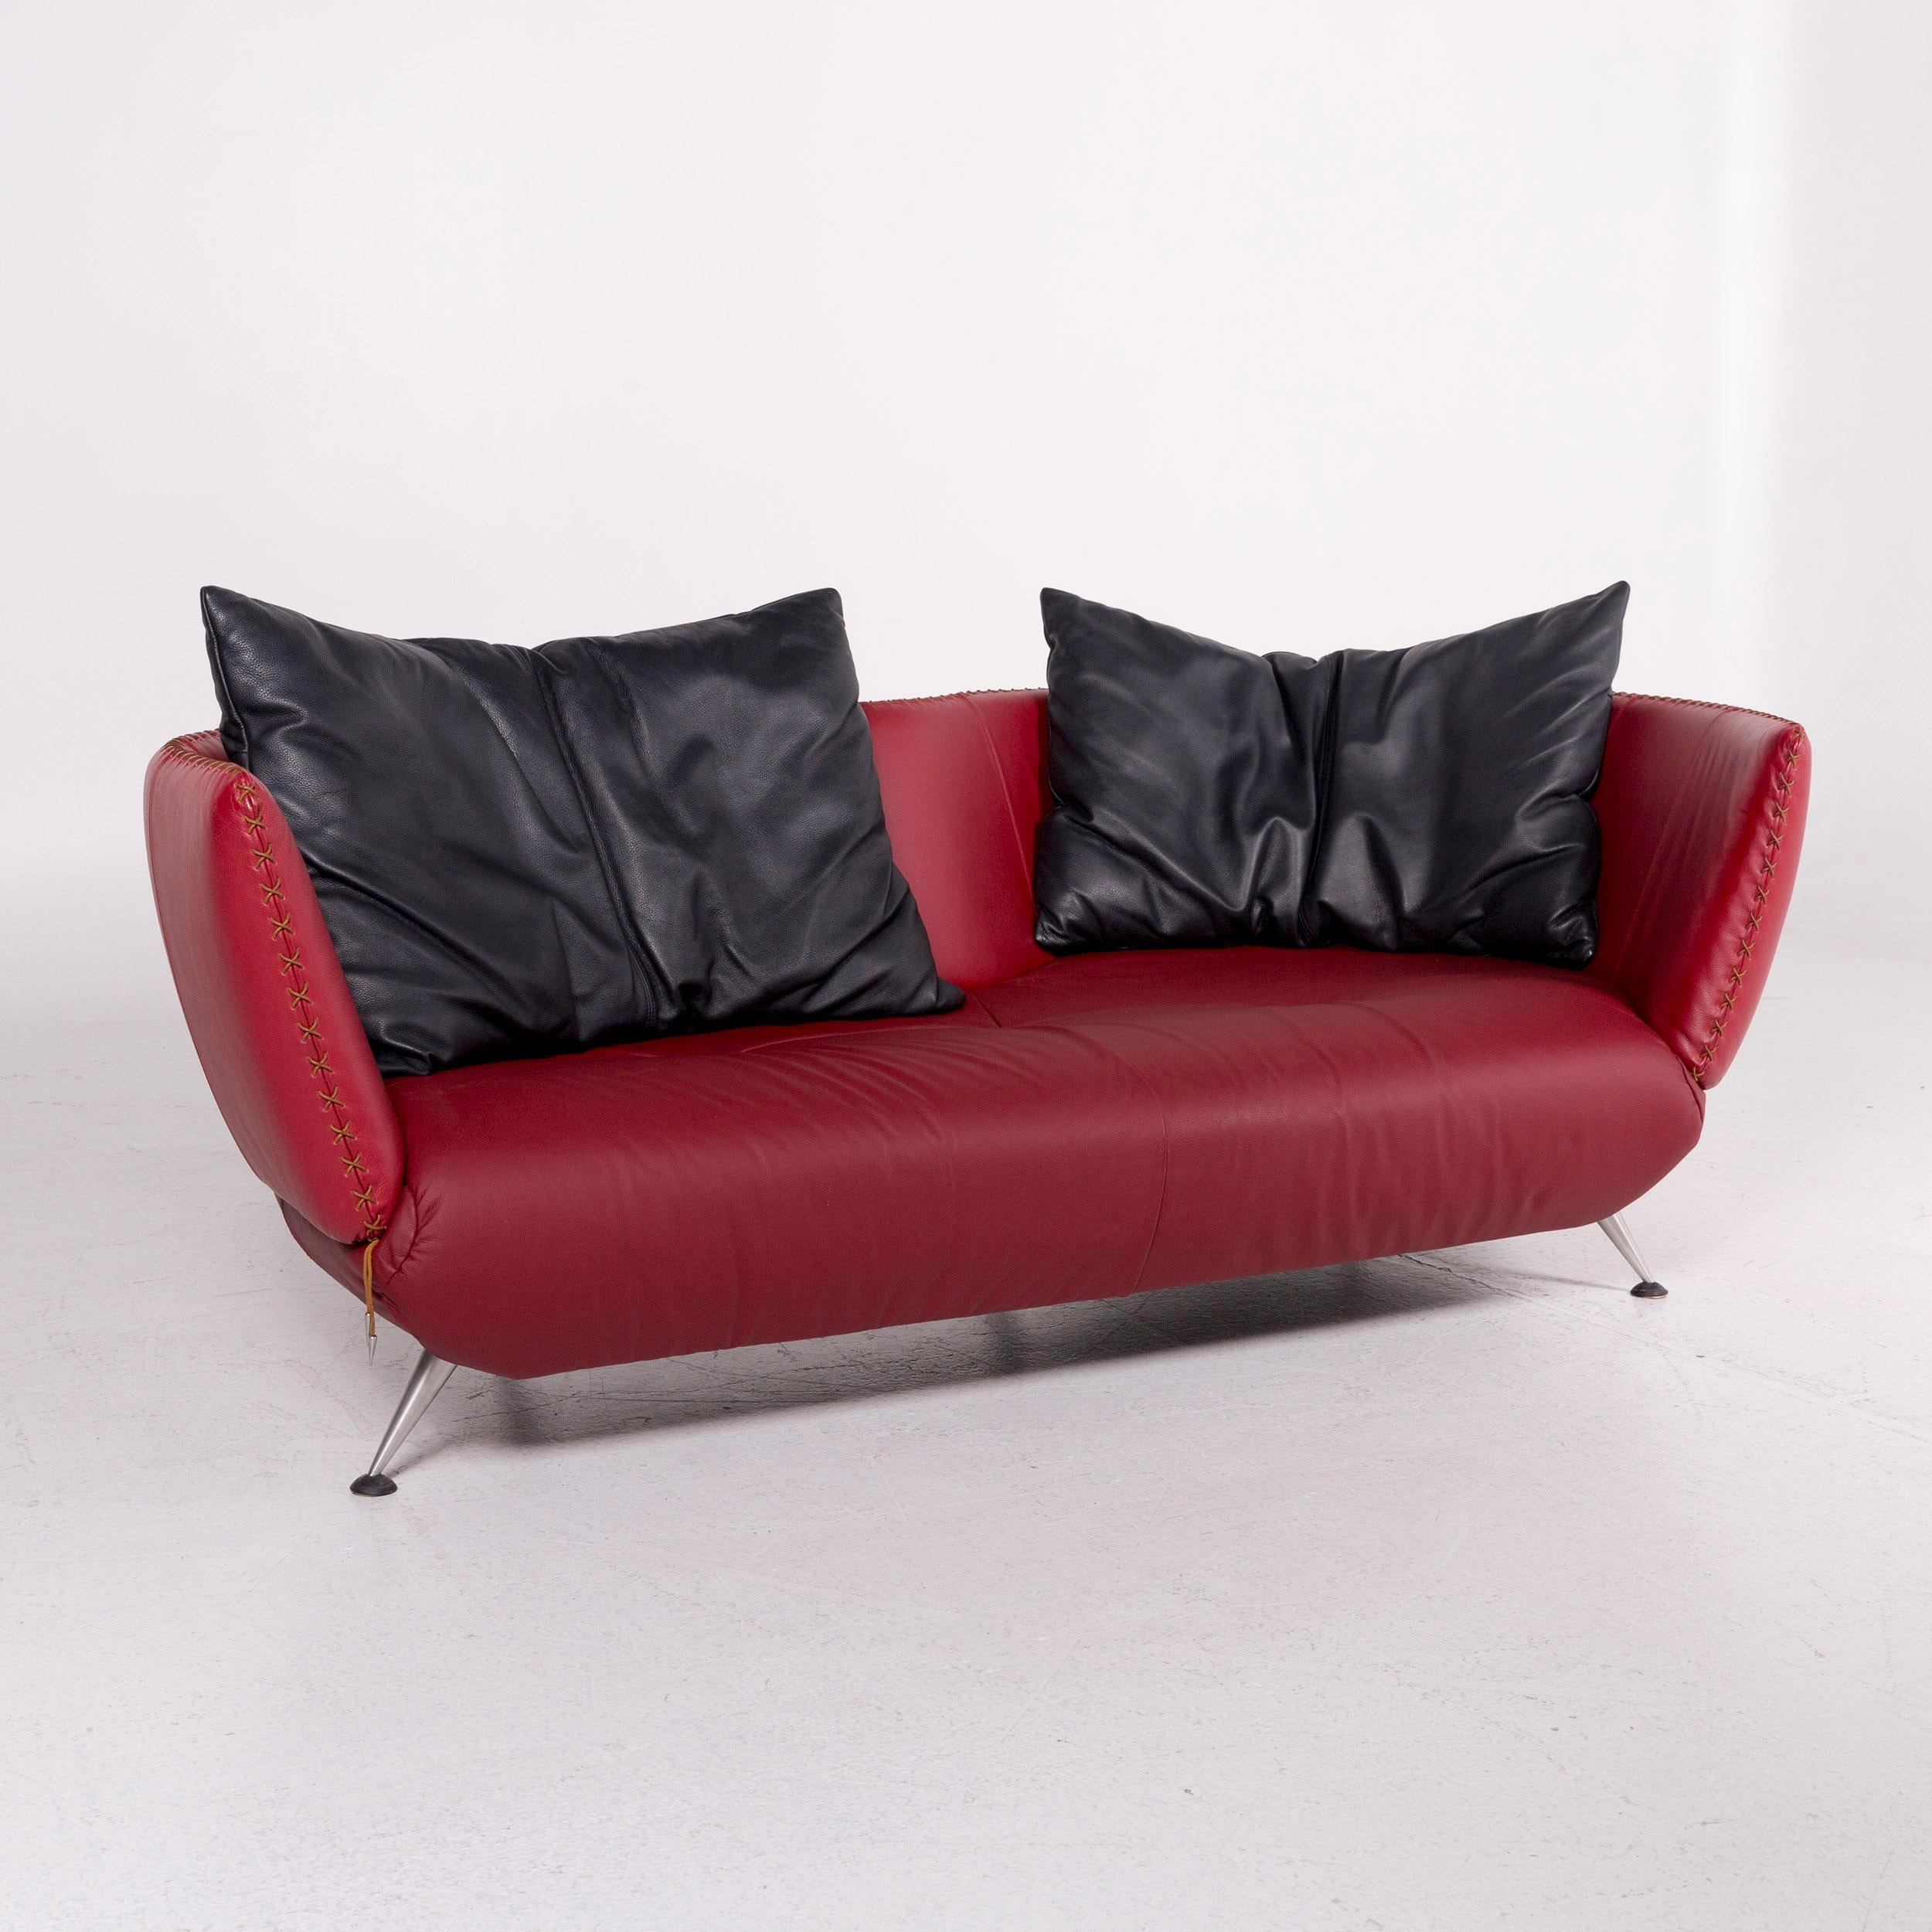 We bring to you a De Sede DS 102 leather sofa red wine red three-seat couch.
  

 Product measurements in centimeters:
 

Depth 135
Width 230
Height 77
Seat-height 41
Rest-height 58
Seat-depth 155
Seat-width 165
Back-height 43.
        